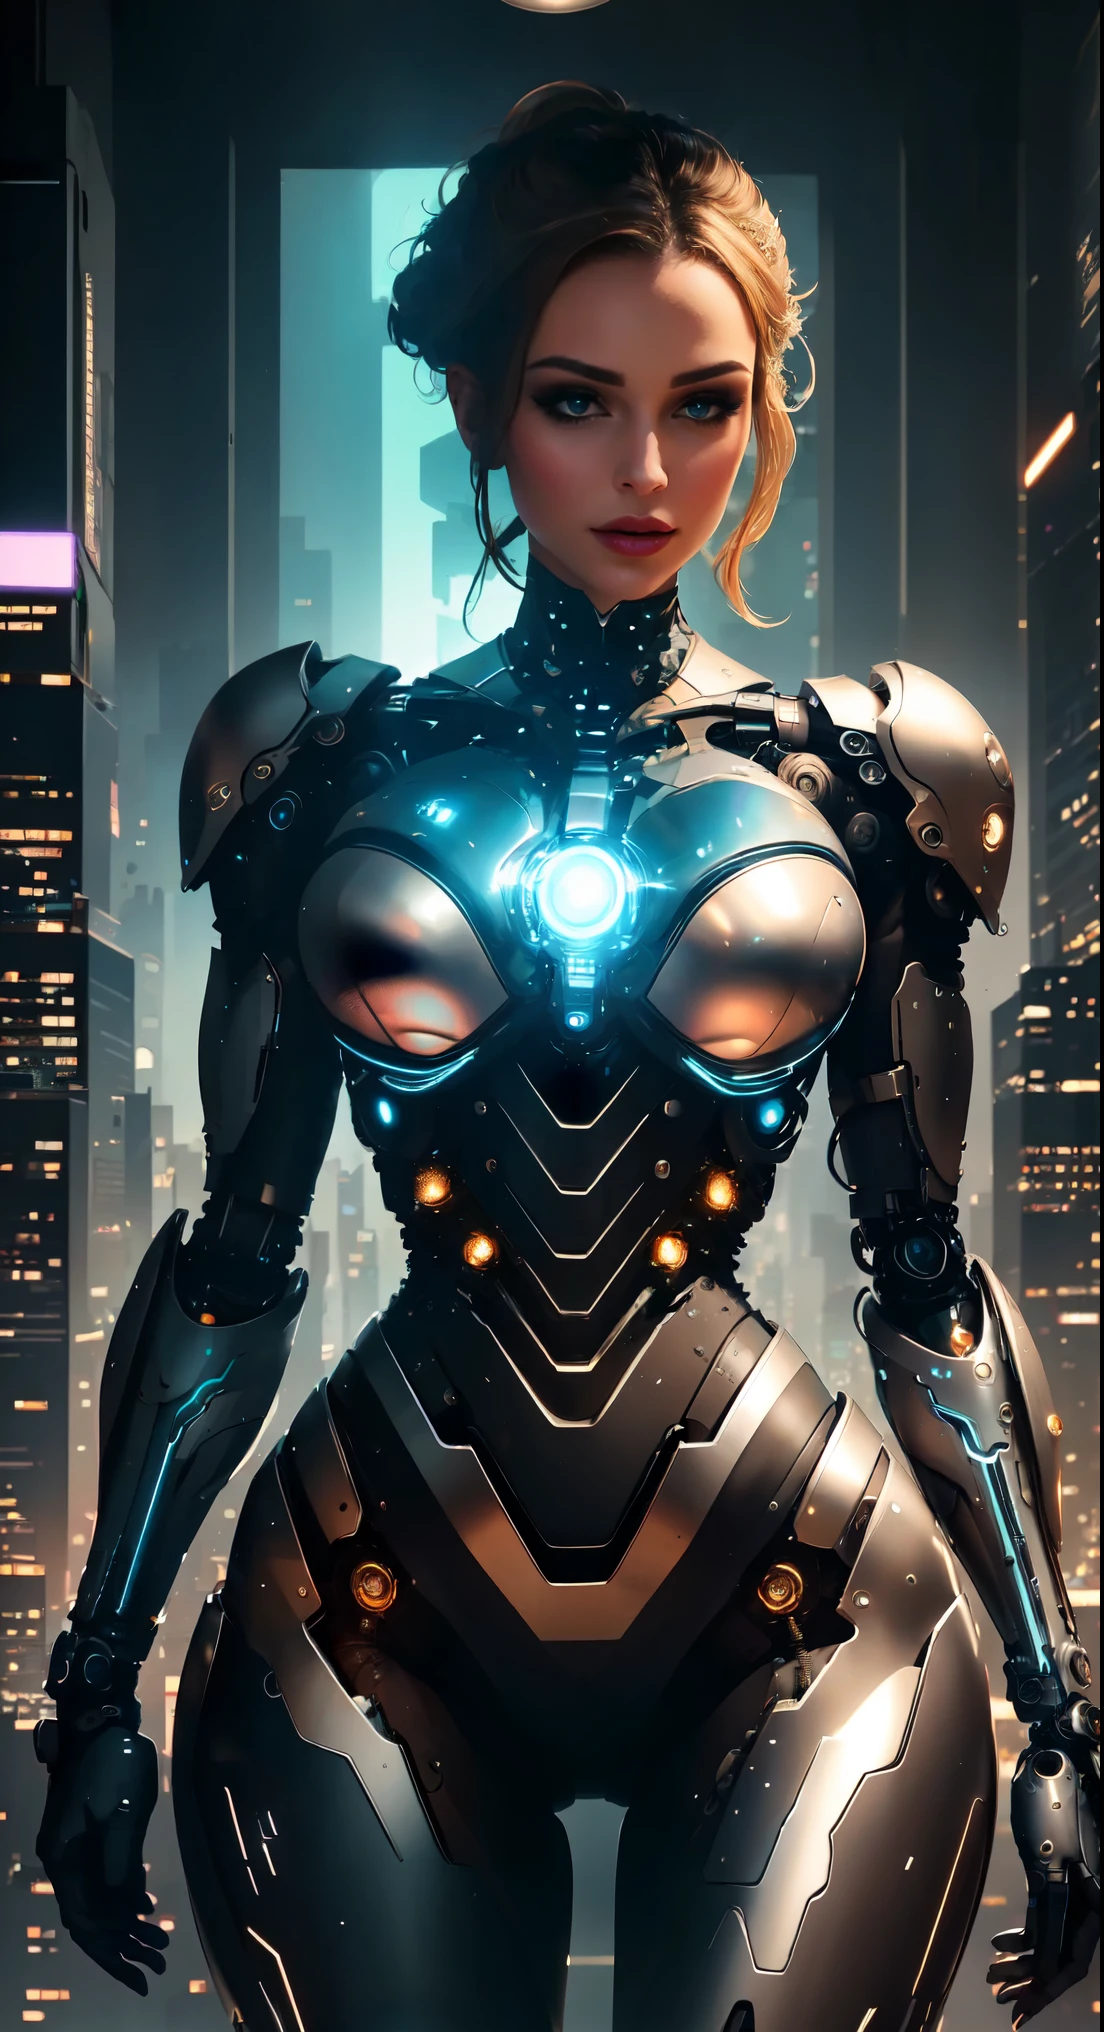 A female cyborg stands in a private reception area, surrounded by the breathtaking skyline of a bustling metropolis. The room is decorated with avant-garde art installations, lighting up the space with vibrant colors and dynamic patterns. The cyborg is dressed in an extravagant, futuristic outfit that accentuates her slender, perfectly proportioned body. Her figure is sculpted with intricate details, showcasing the magnificent anatomy of a technological marvel. The focus is mainly on her upper body, with the frame elegantly cropping at the waist, highlighting her slim physique and beautiful curves.

Her face exudes an ethereal beauty, adorned with a blend of delicate mechanical features and flawless human traits. The eyes are enchantingly detailed, delicately crafted with a mix of vivid colors and hyper-realistic textures. They sparkle with a mysterious charm and captivate anyone who gazes into them. The lips are impeccably defined, displaying a soft, natural shade that complements her overall appearance. The cyborg's complexion features hyper-detailed natural skin textures, illuminated by a soft, diffused light that accentuates her flawless complexion.

The room is bathed in a mesmerizing HDR lighting, creating a dream-like atmosphere with a perfect balance of shadows and highlights. The intricate details of the surrounding environment are emphasized through hyper-detailing techniques, bringing out every little aspect in breathtaking clarity. The textures and materials of the room are rendered with utmost precision, showcasing a wide range of luxurious surfaces, from sleek glass panels to reflective metal accents.

The overall mood of the image is a blend of futuristic decadence and sophistication. The colors are vibrant and vivid, with a touch of surrealism that adds depth and visual interest to the scene. The composition is carefully arranged to create a sense of balance and harmony, with the cyborg serving as the focal point amidst the grandeur of the cityscape.